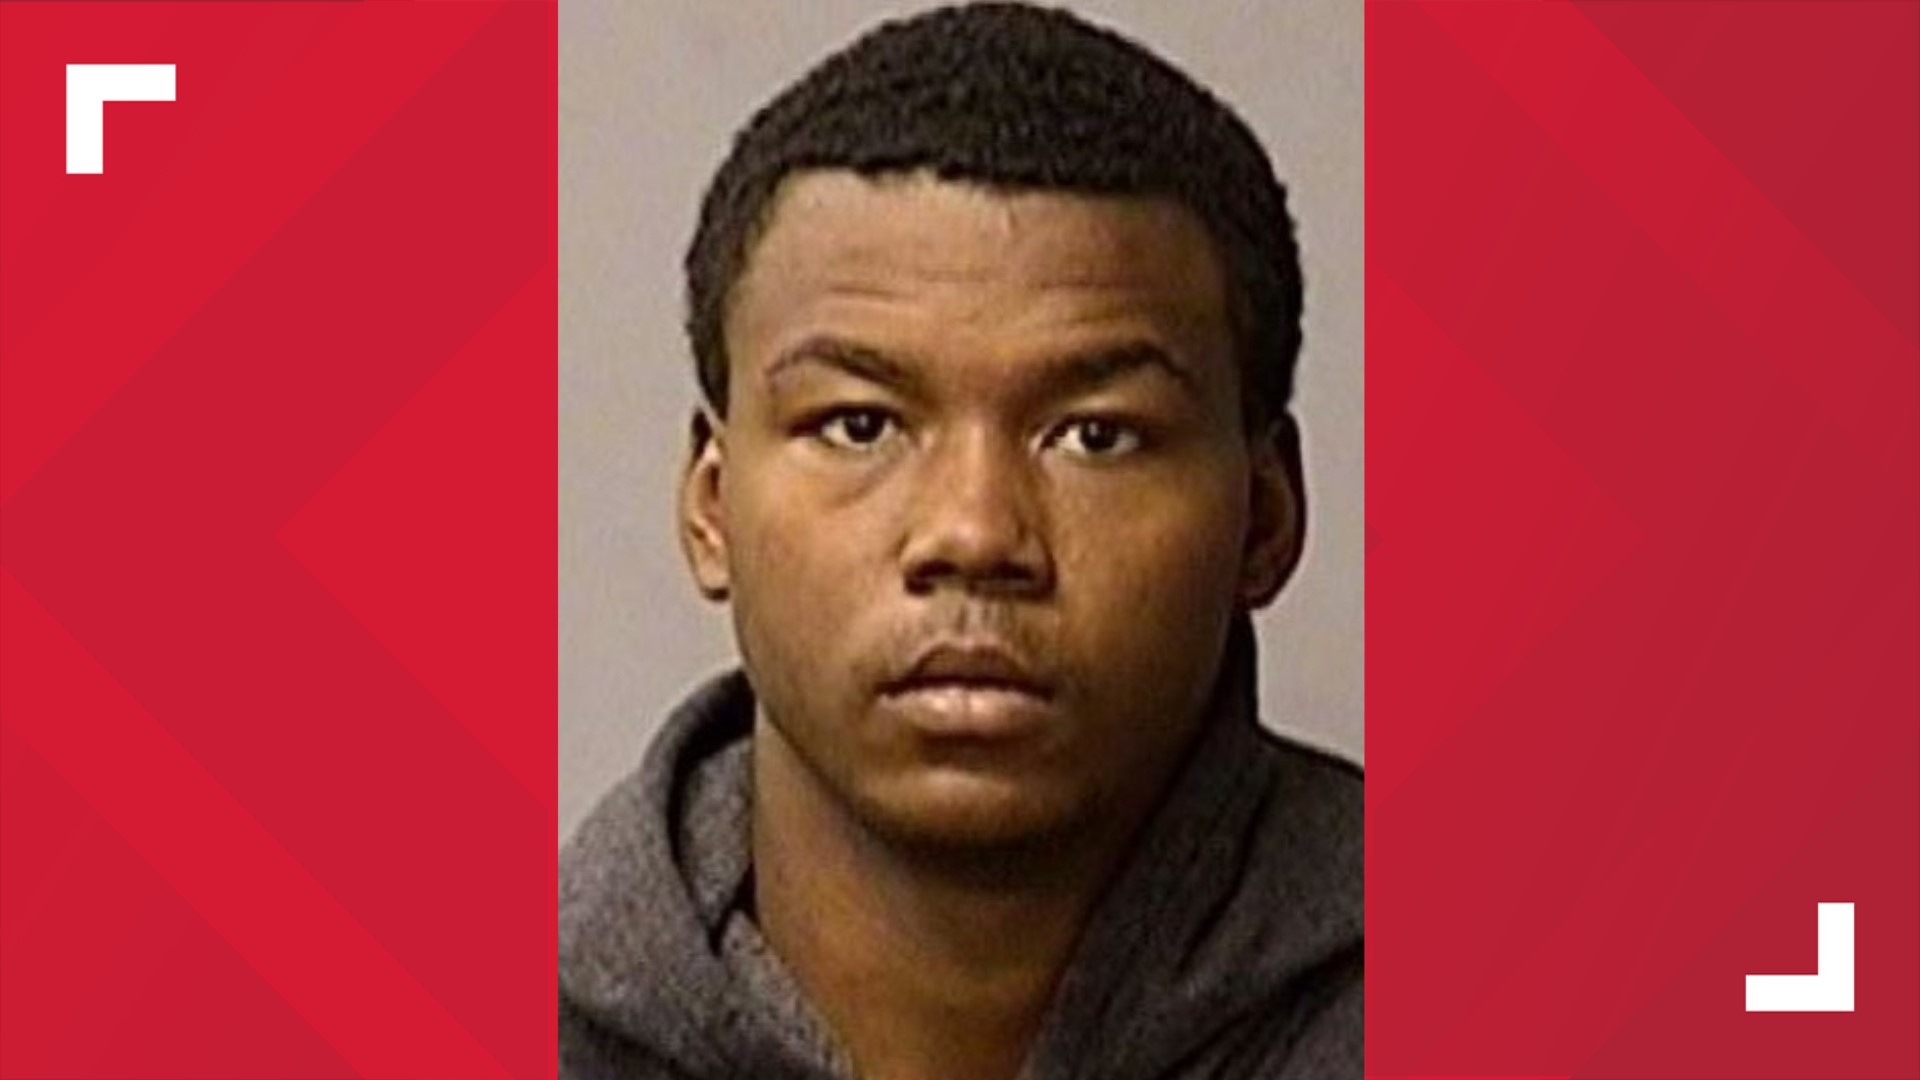 Kahlil Thorne, 19, was arrested and charged for homicide and attempted robbery, Modesto police said.